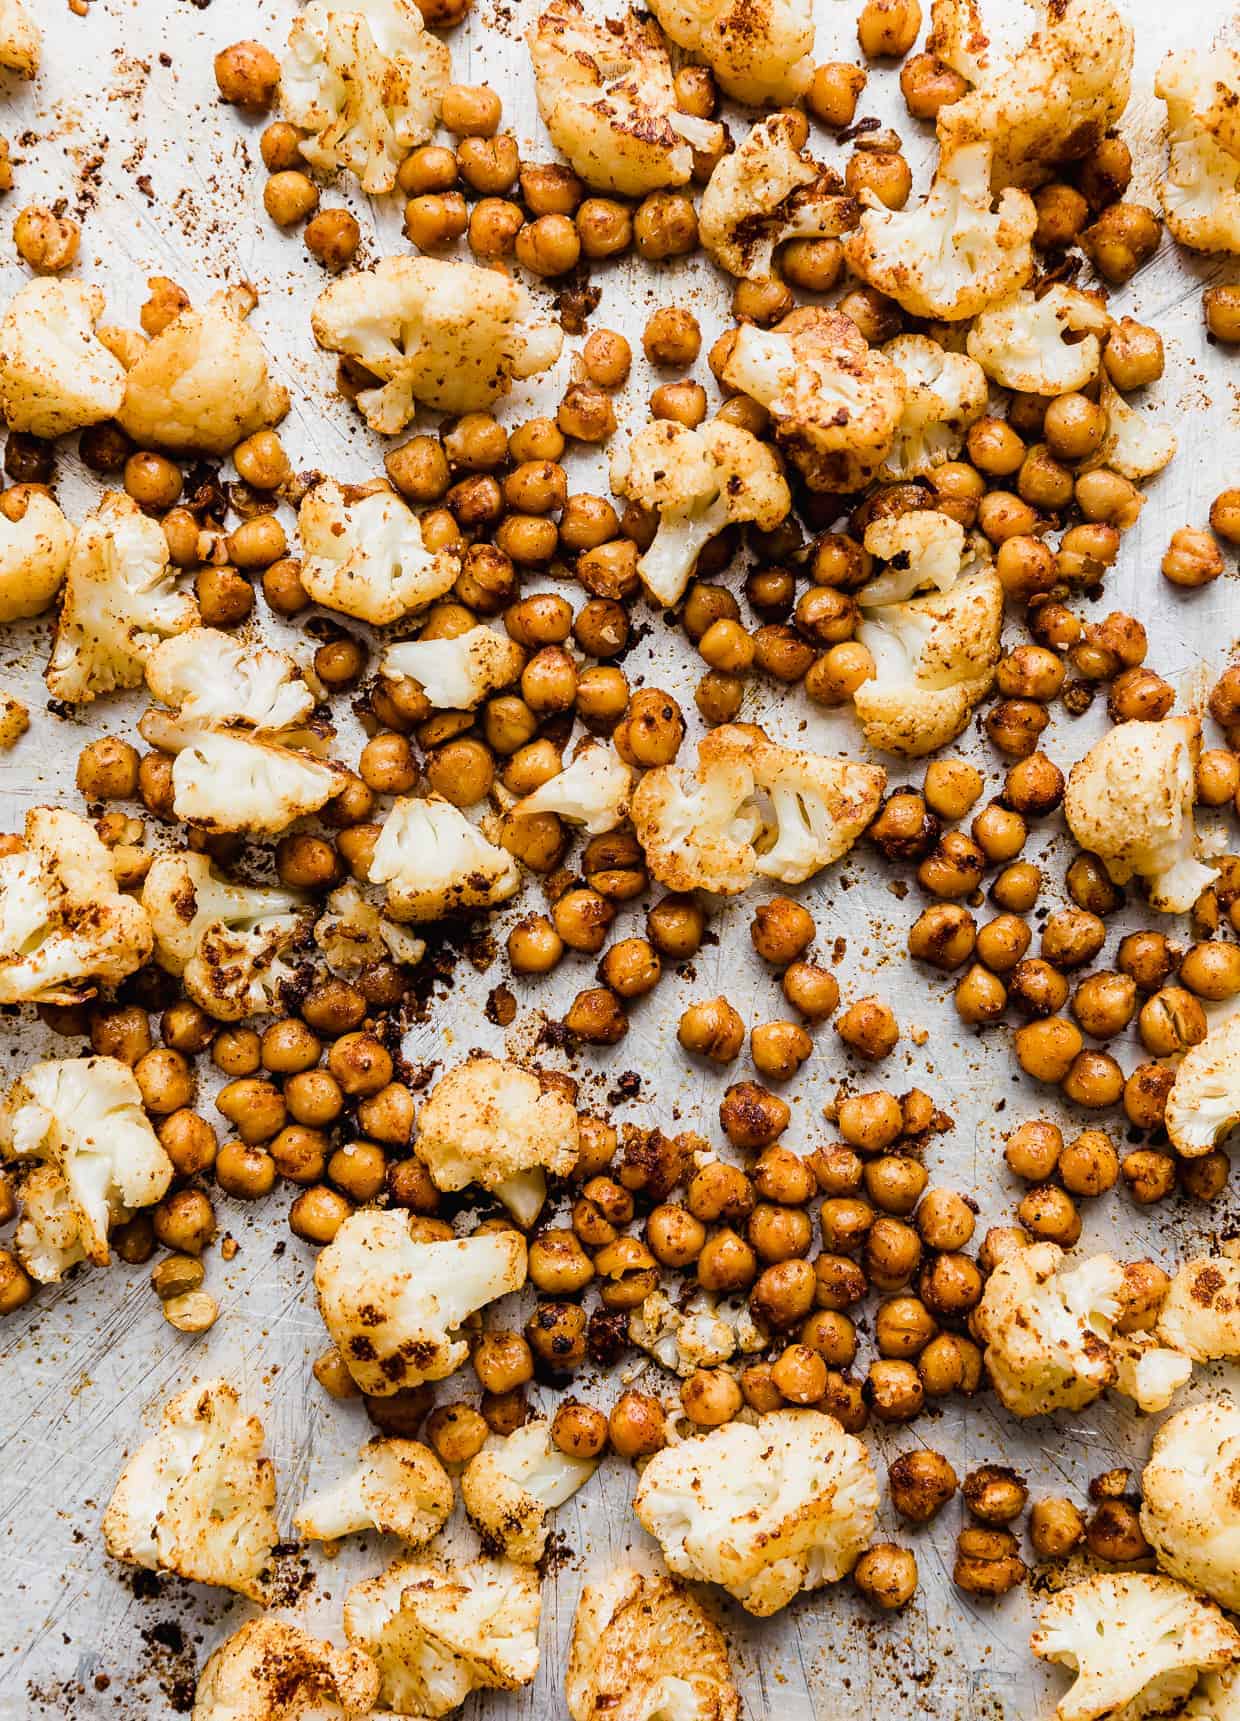 Roasted cauliflower florets and chickpeas on a silver baking sheet.